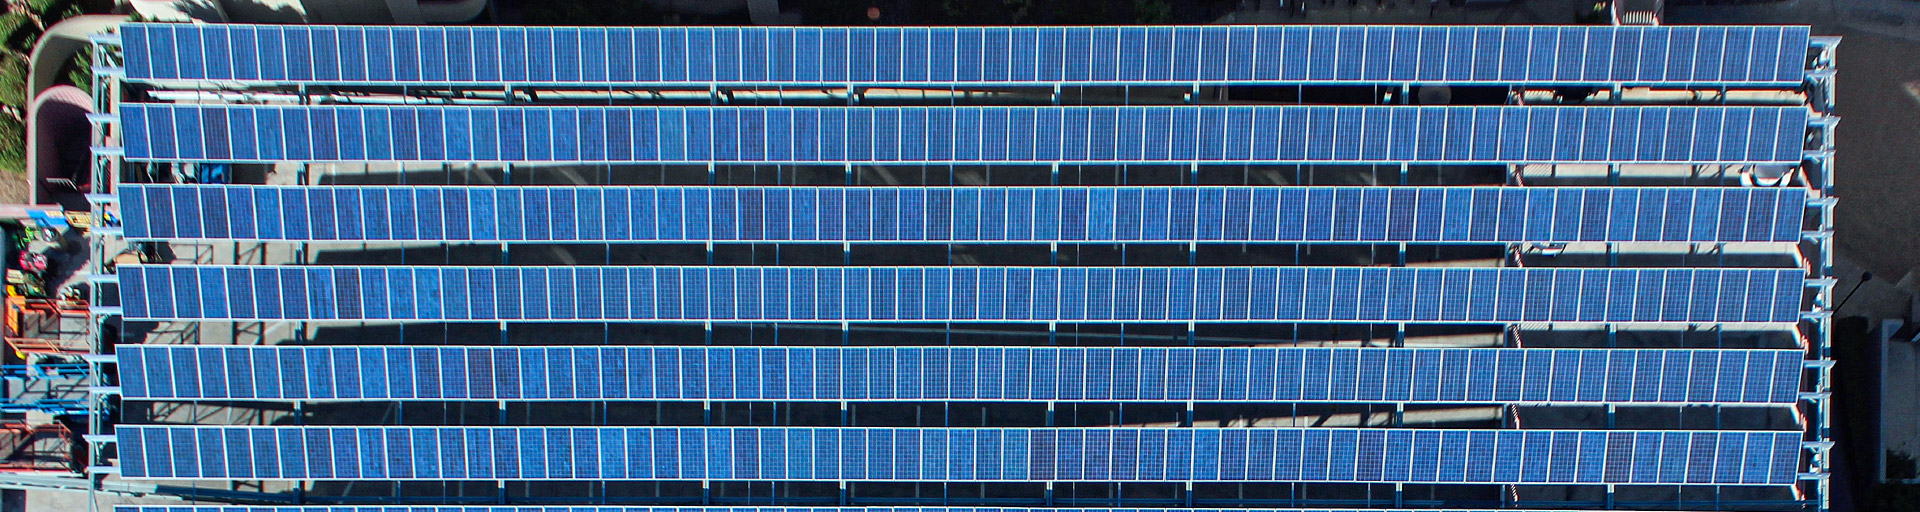 Parking Structure 6 - U Towers - solar